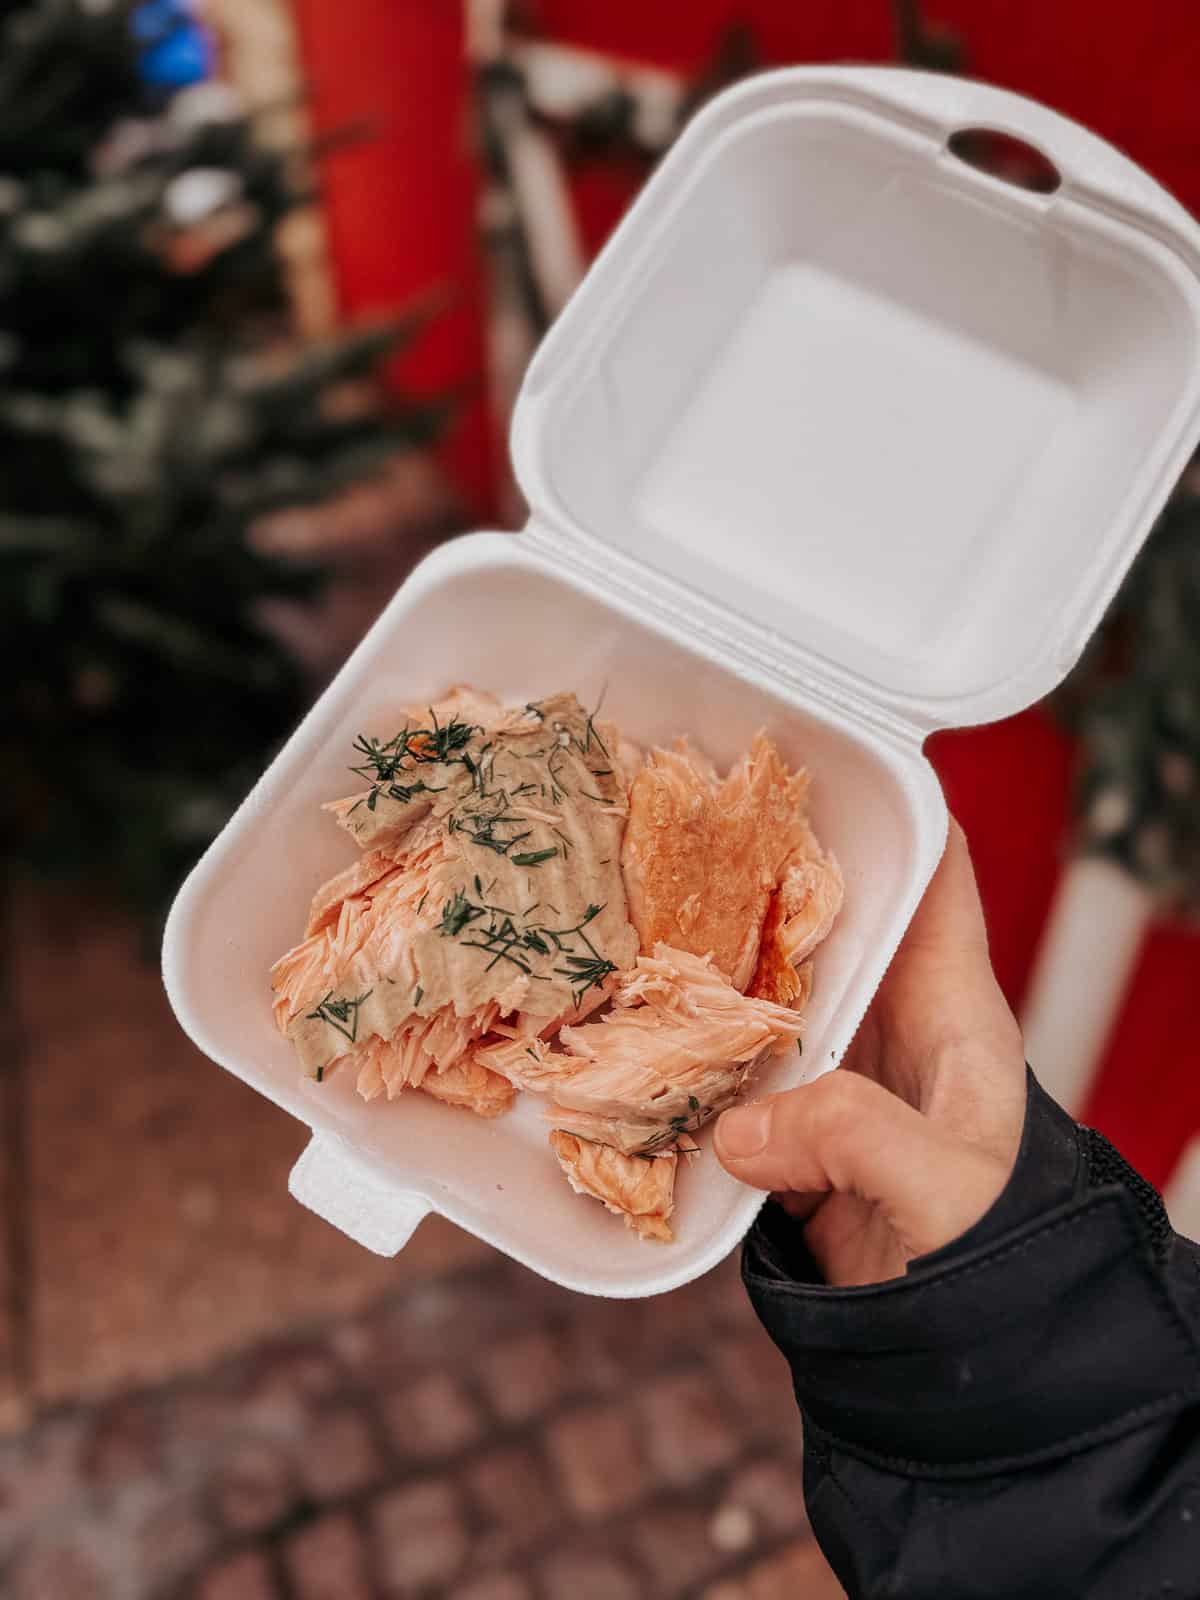 Close-up of a takeout container held in hand, filled with flaked salmon seasoned with fresh herbs, emphasizing a quick and savory street food option.